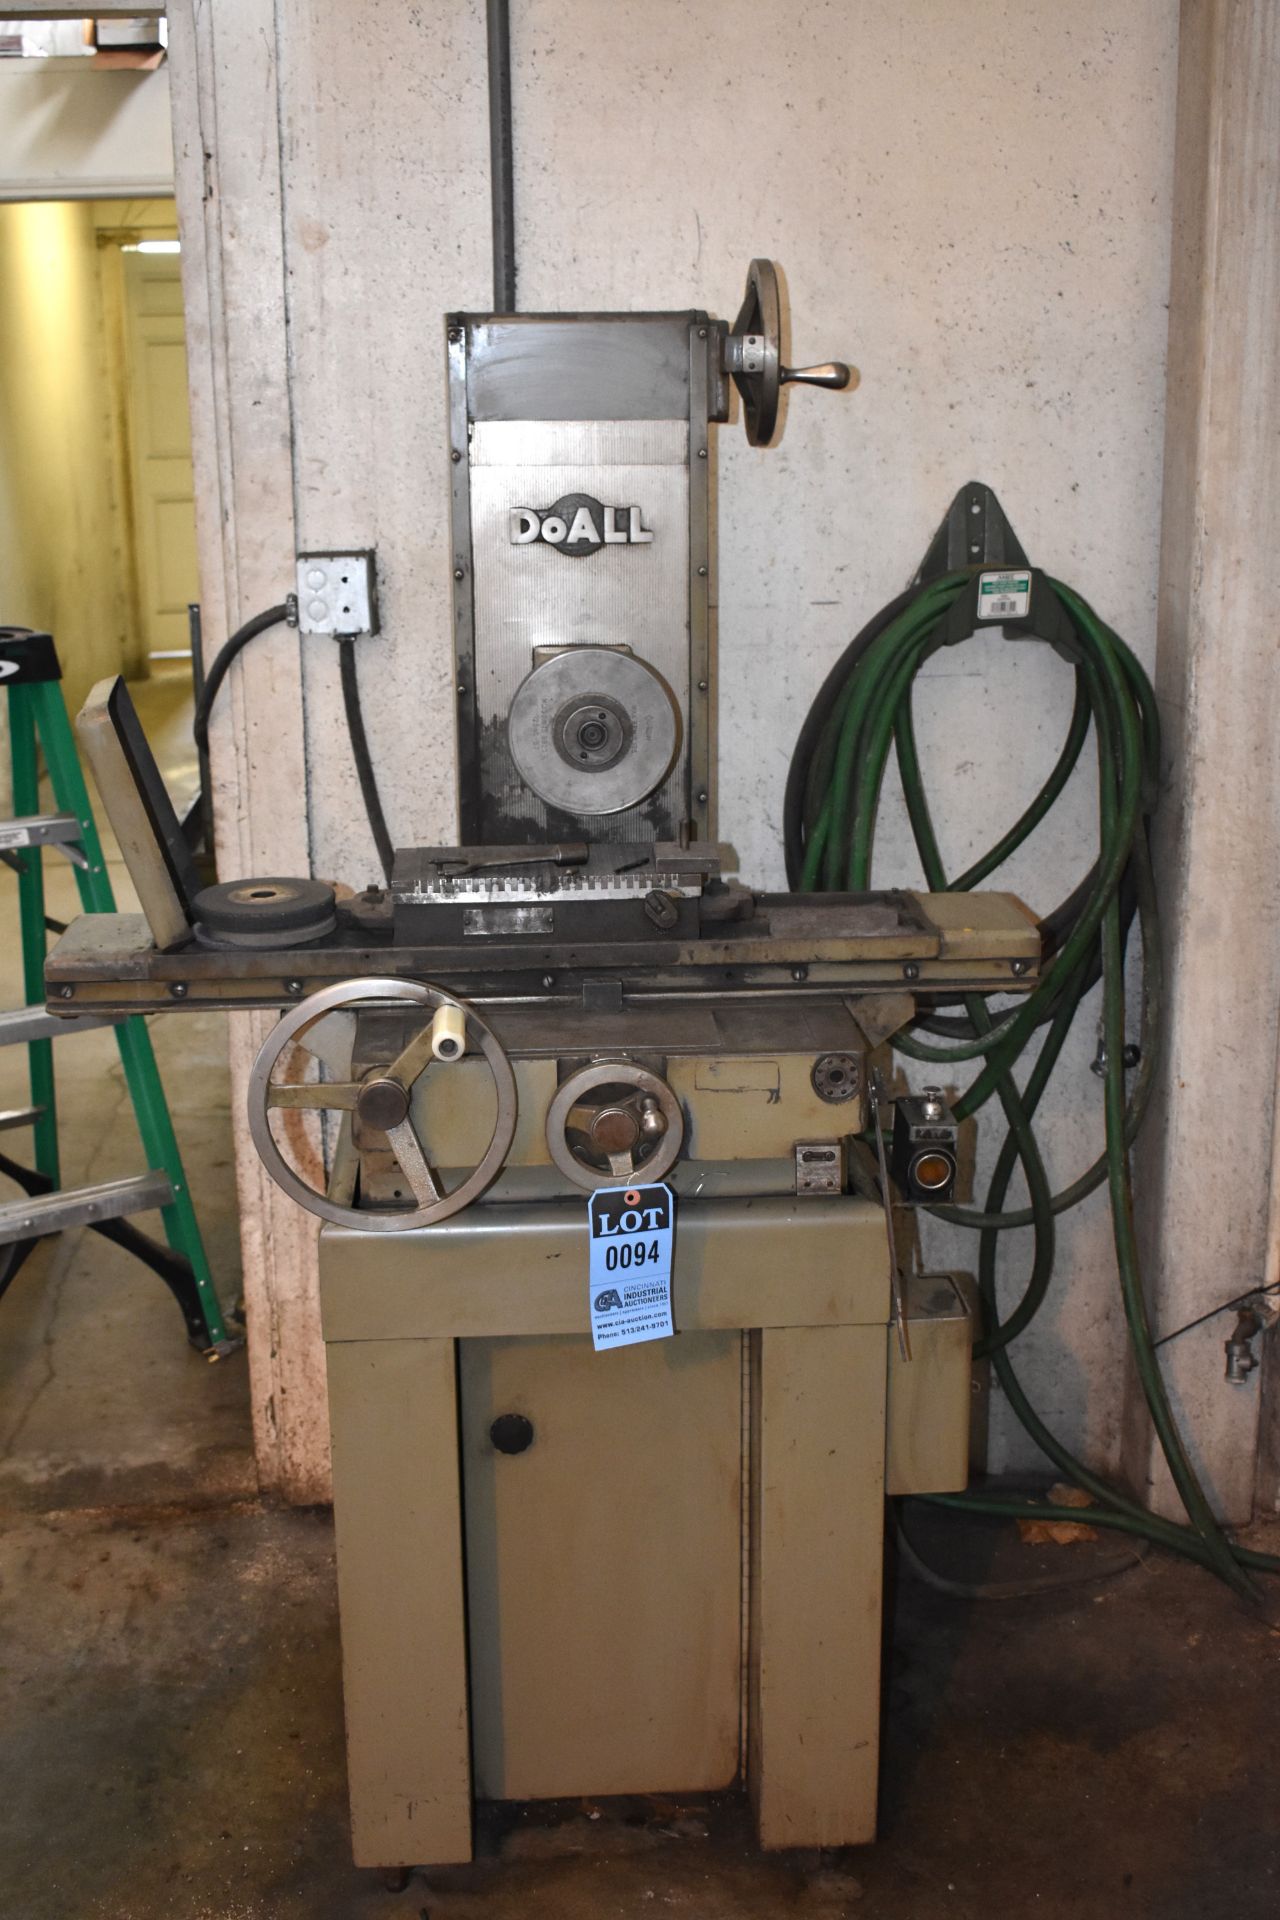 6" X 12" DOALL SURFACE GRINDER